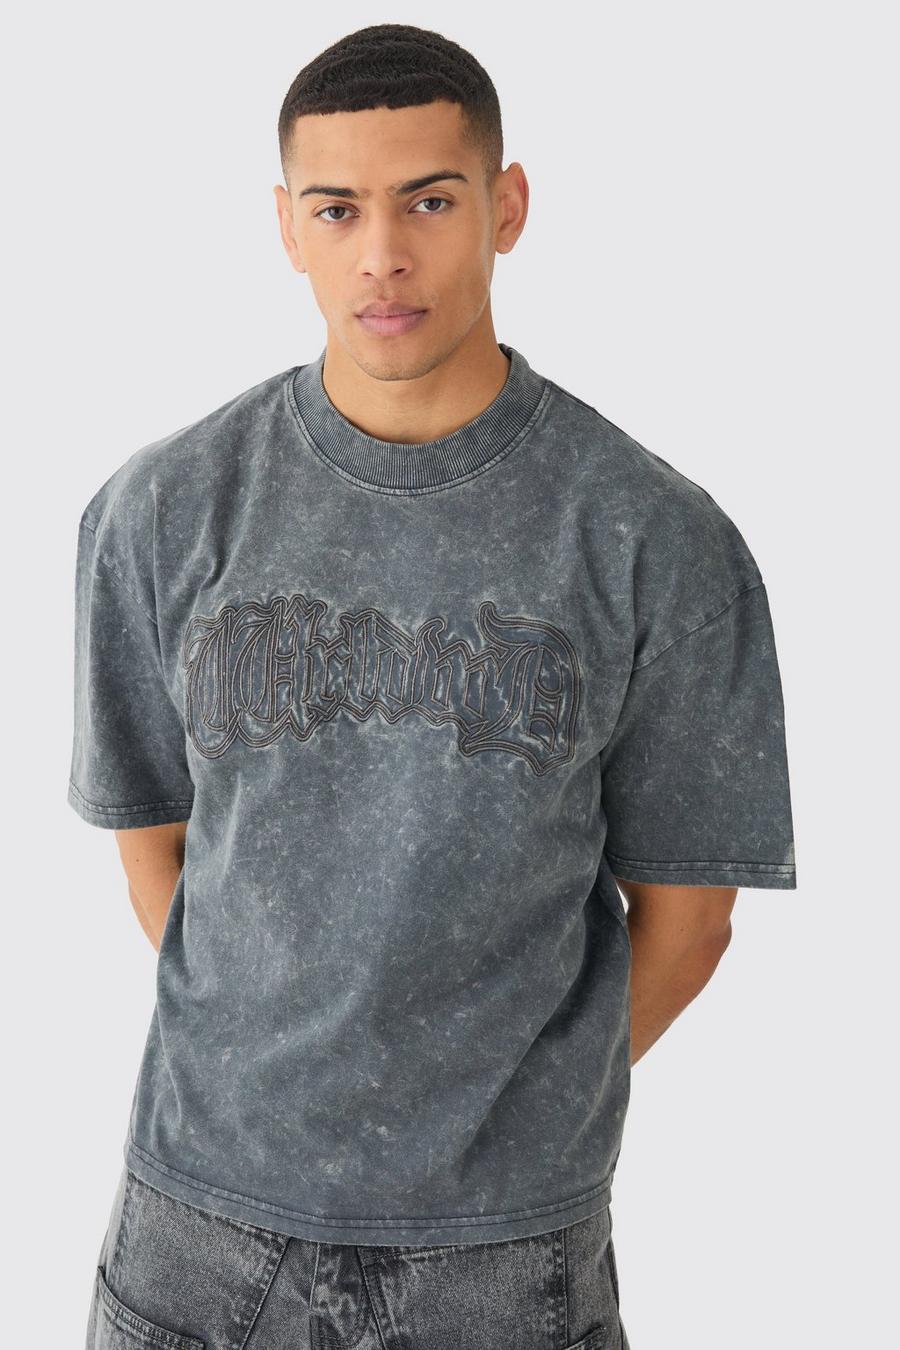 Loose Fit Boxy Acid Wash Worldwide Embroidered T-shirt, Charcoal